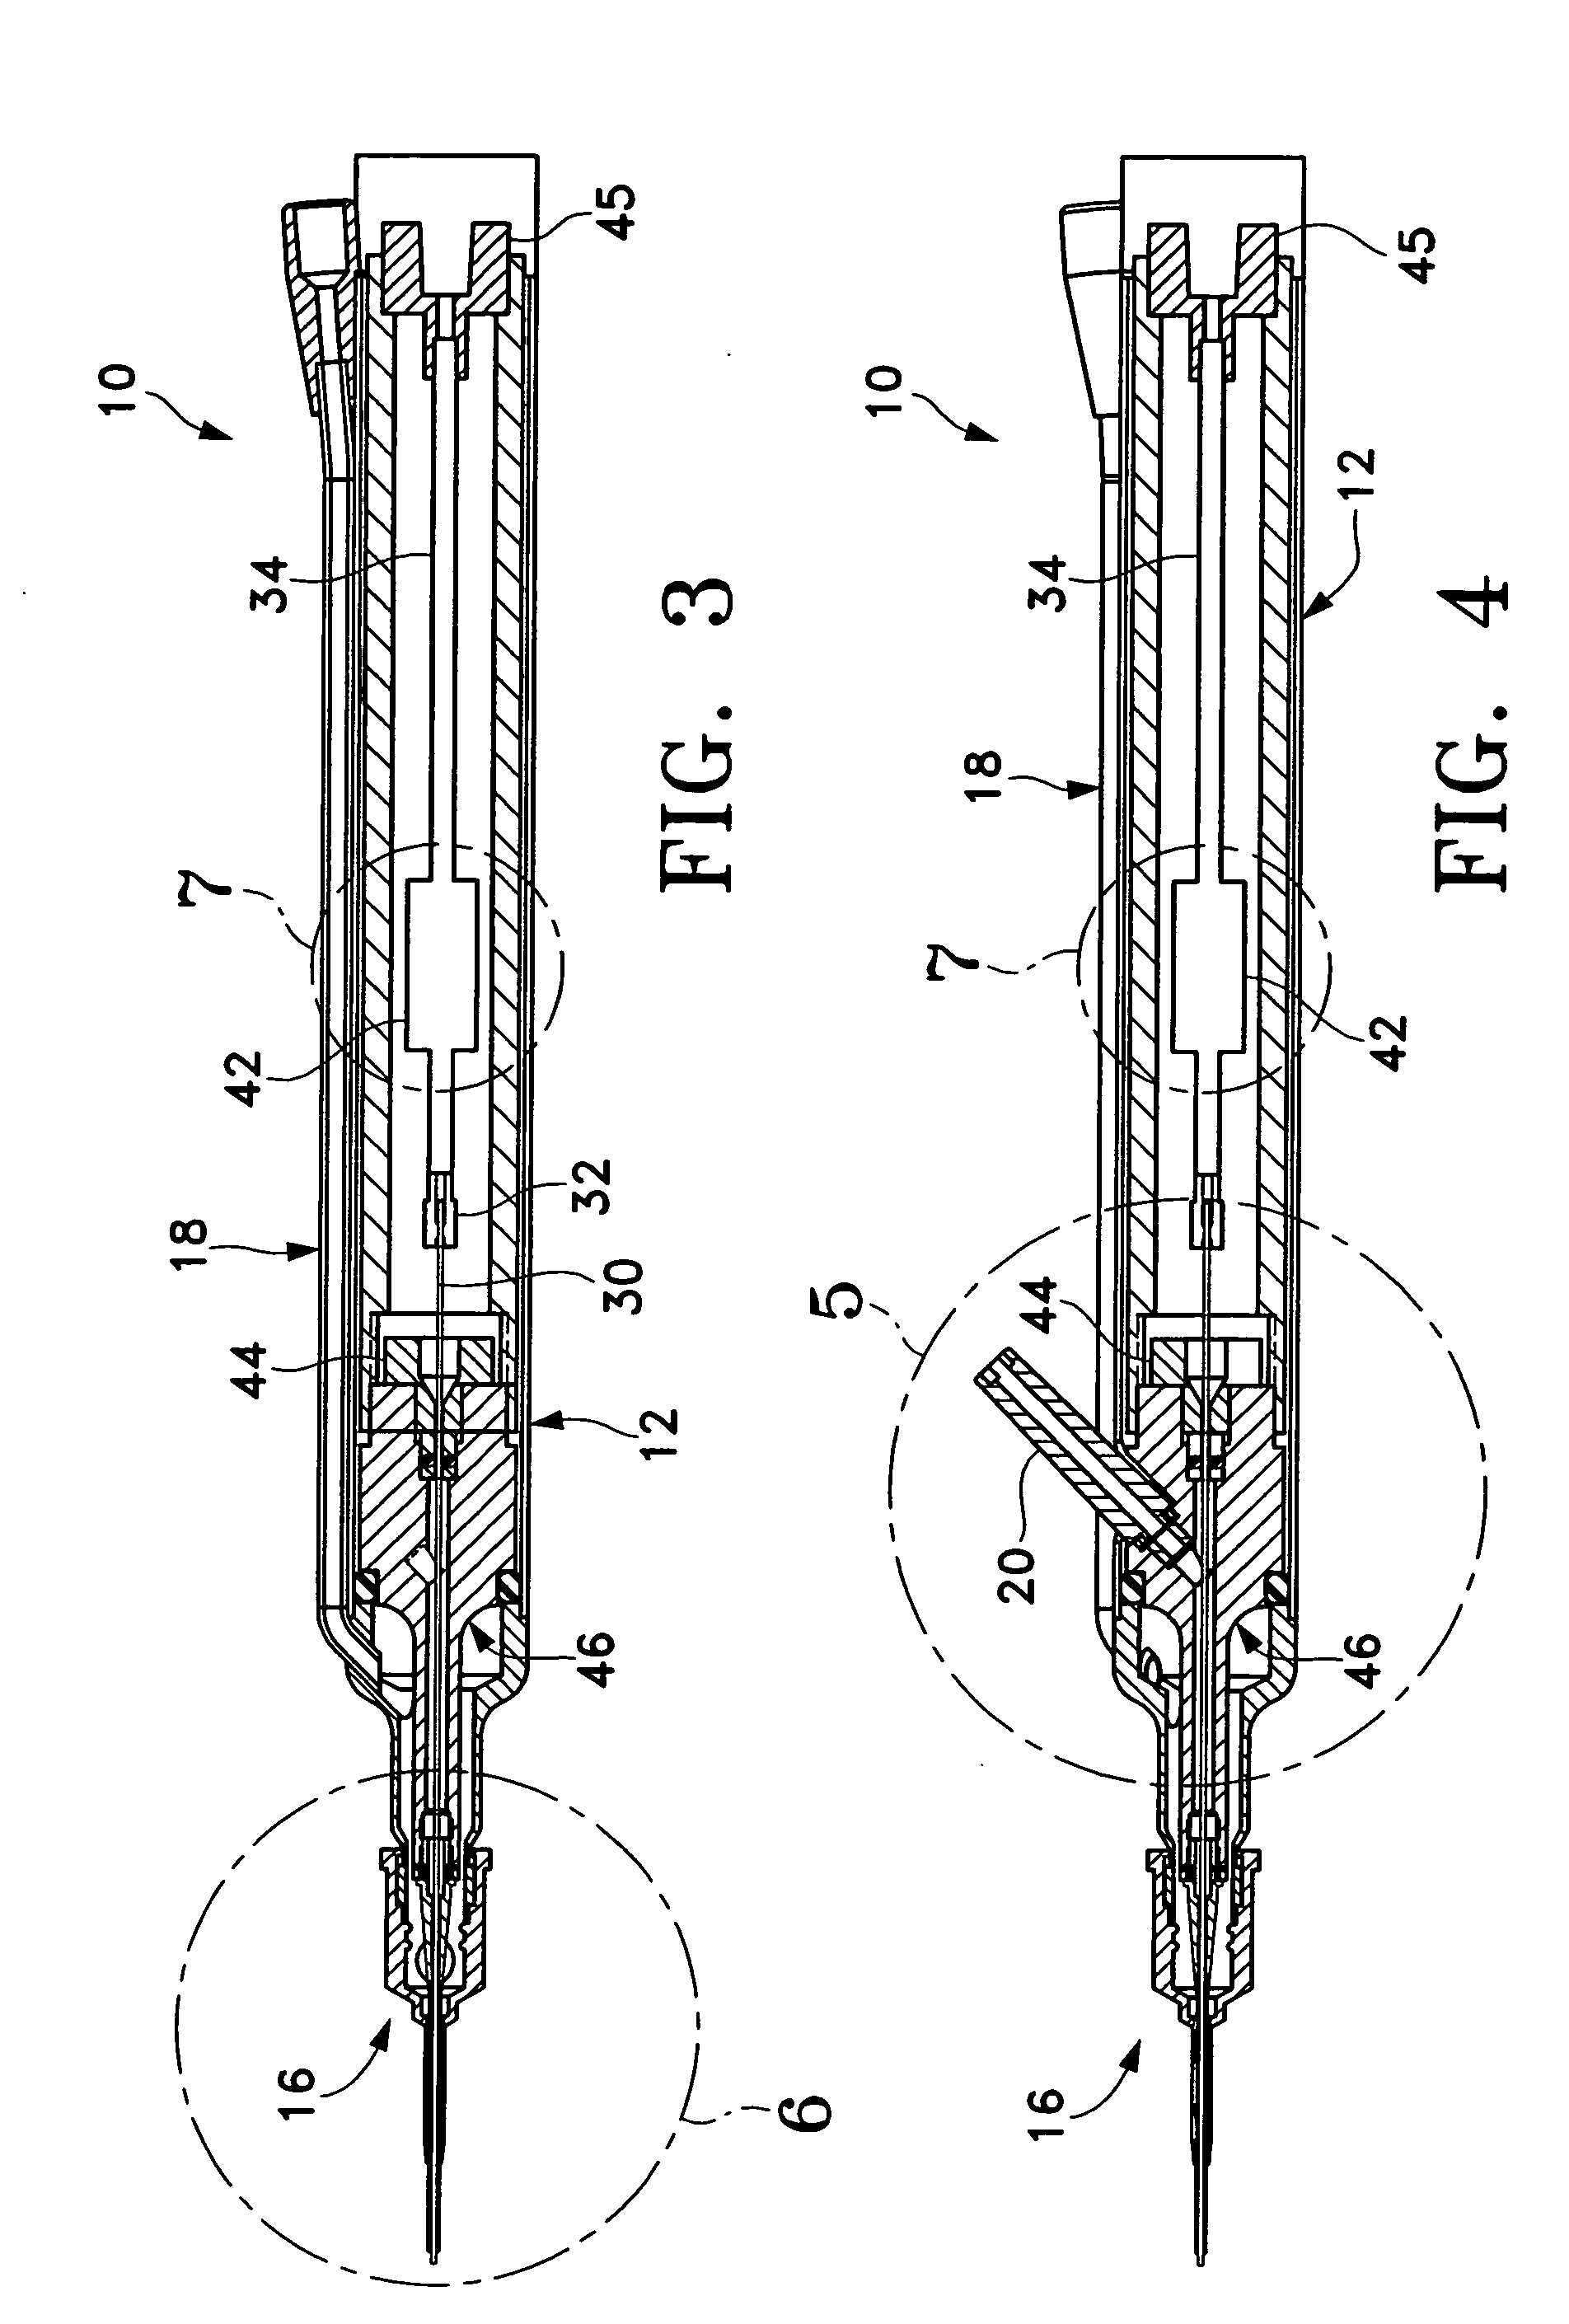 Apparatus and method for determining that a surgical fluid container is near empty